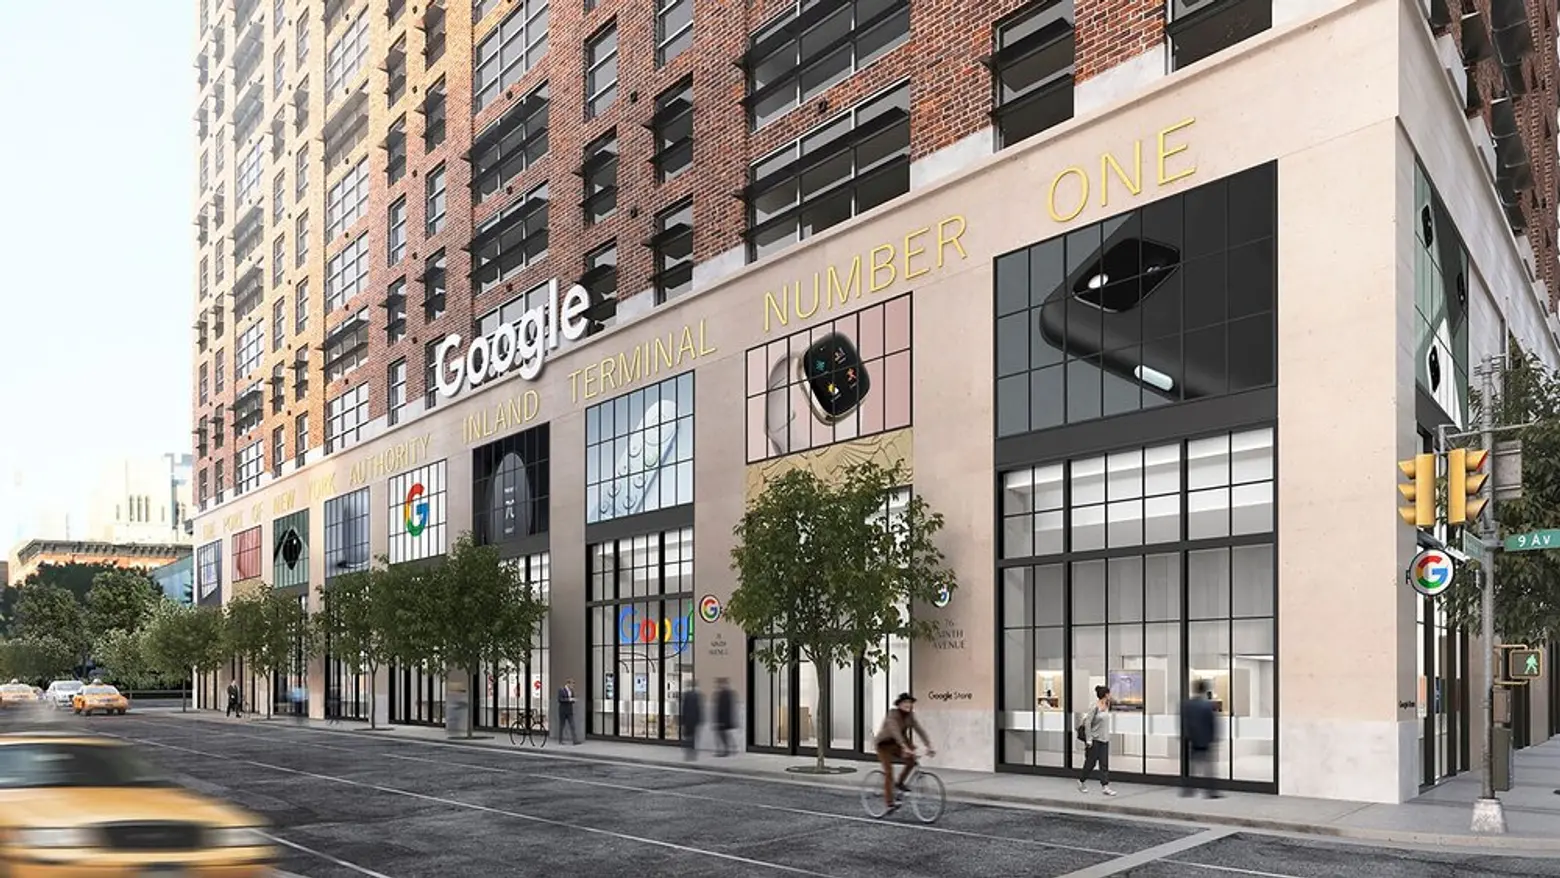 Google is opening its first-ever retail store in Chelsea this summer